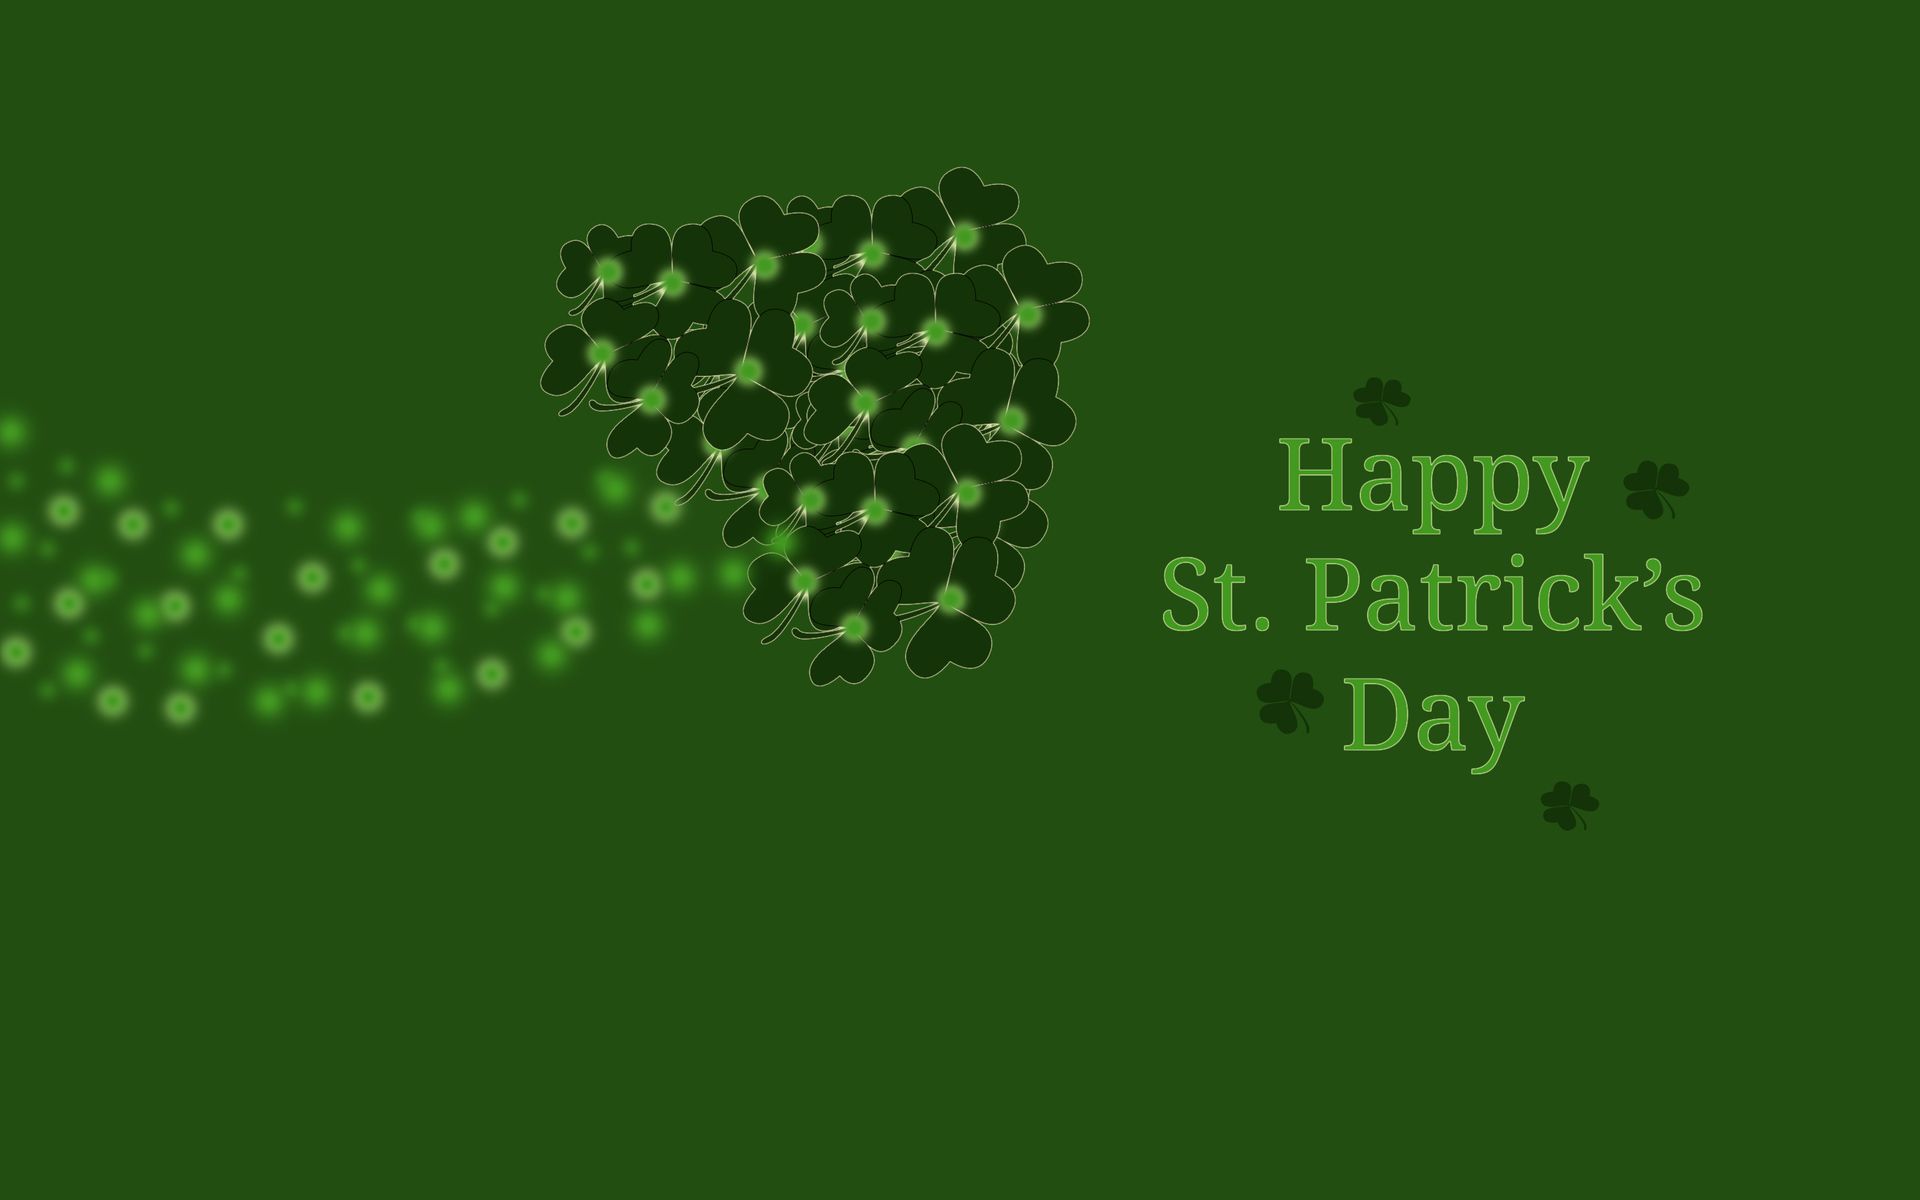 Happy Saint Patrick's Day 2020 HD Wallpapers - Wallpaper Cave